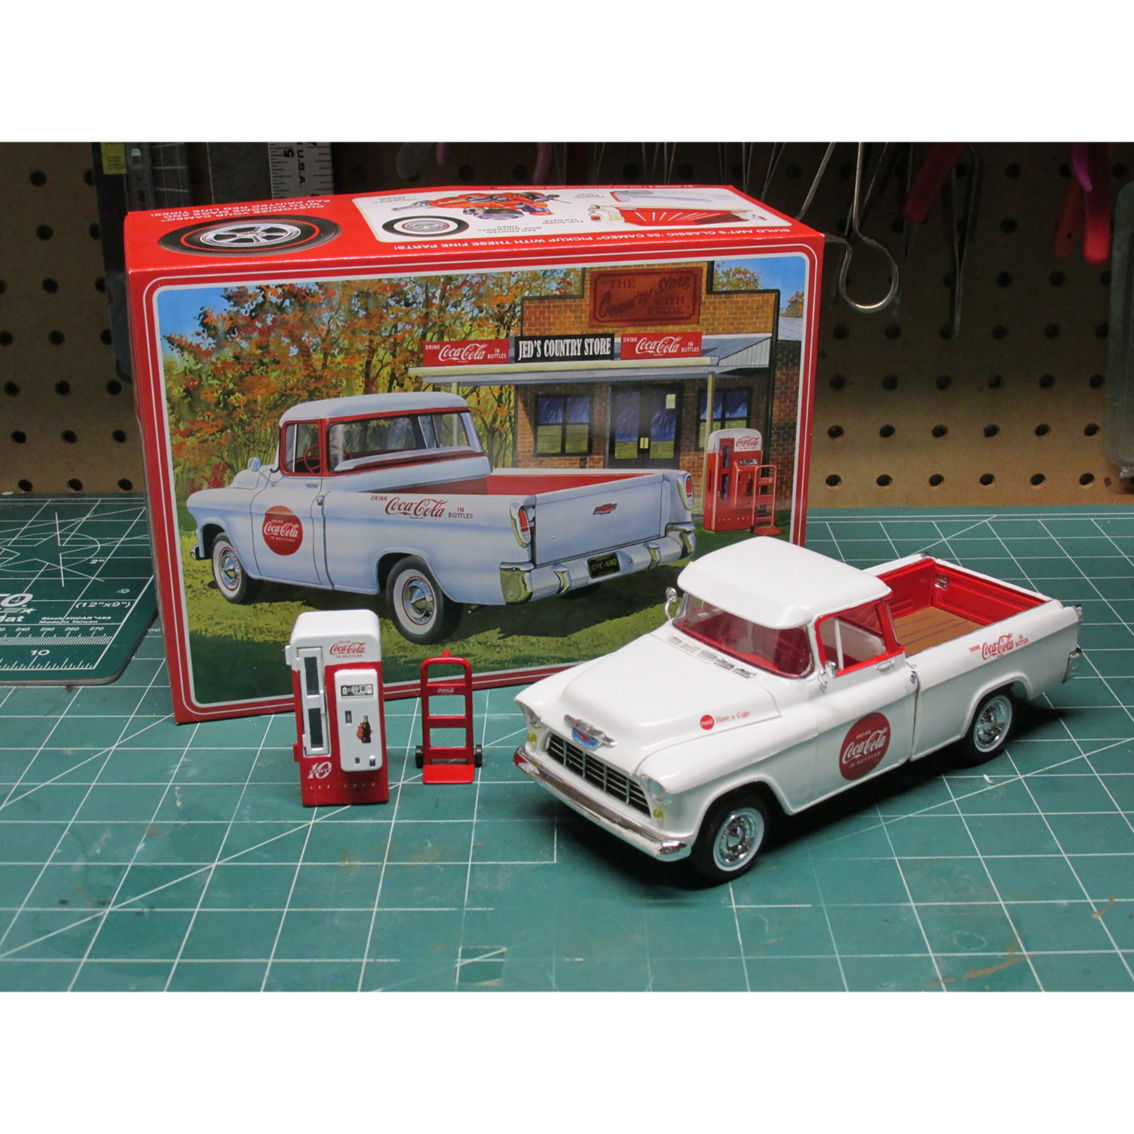 AMT 1955 Chevy Cameo Pickup (Coca-Cola) 1:25 Scale Model Kit - Image 6 of 7